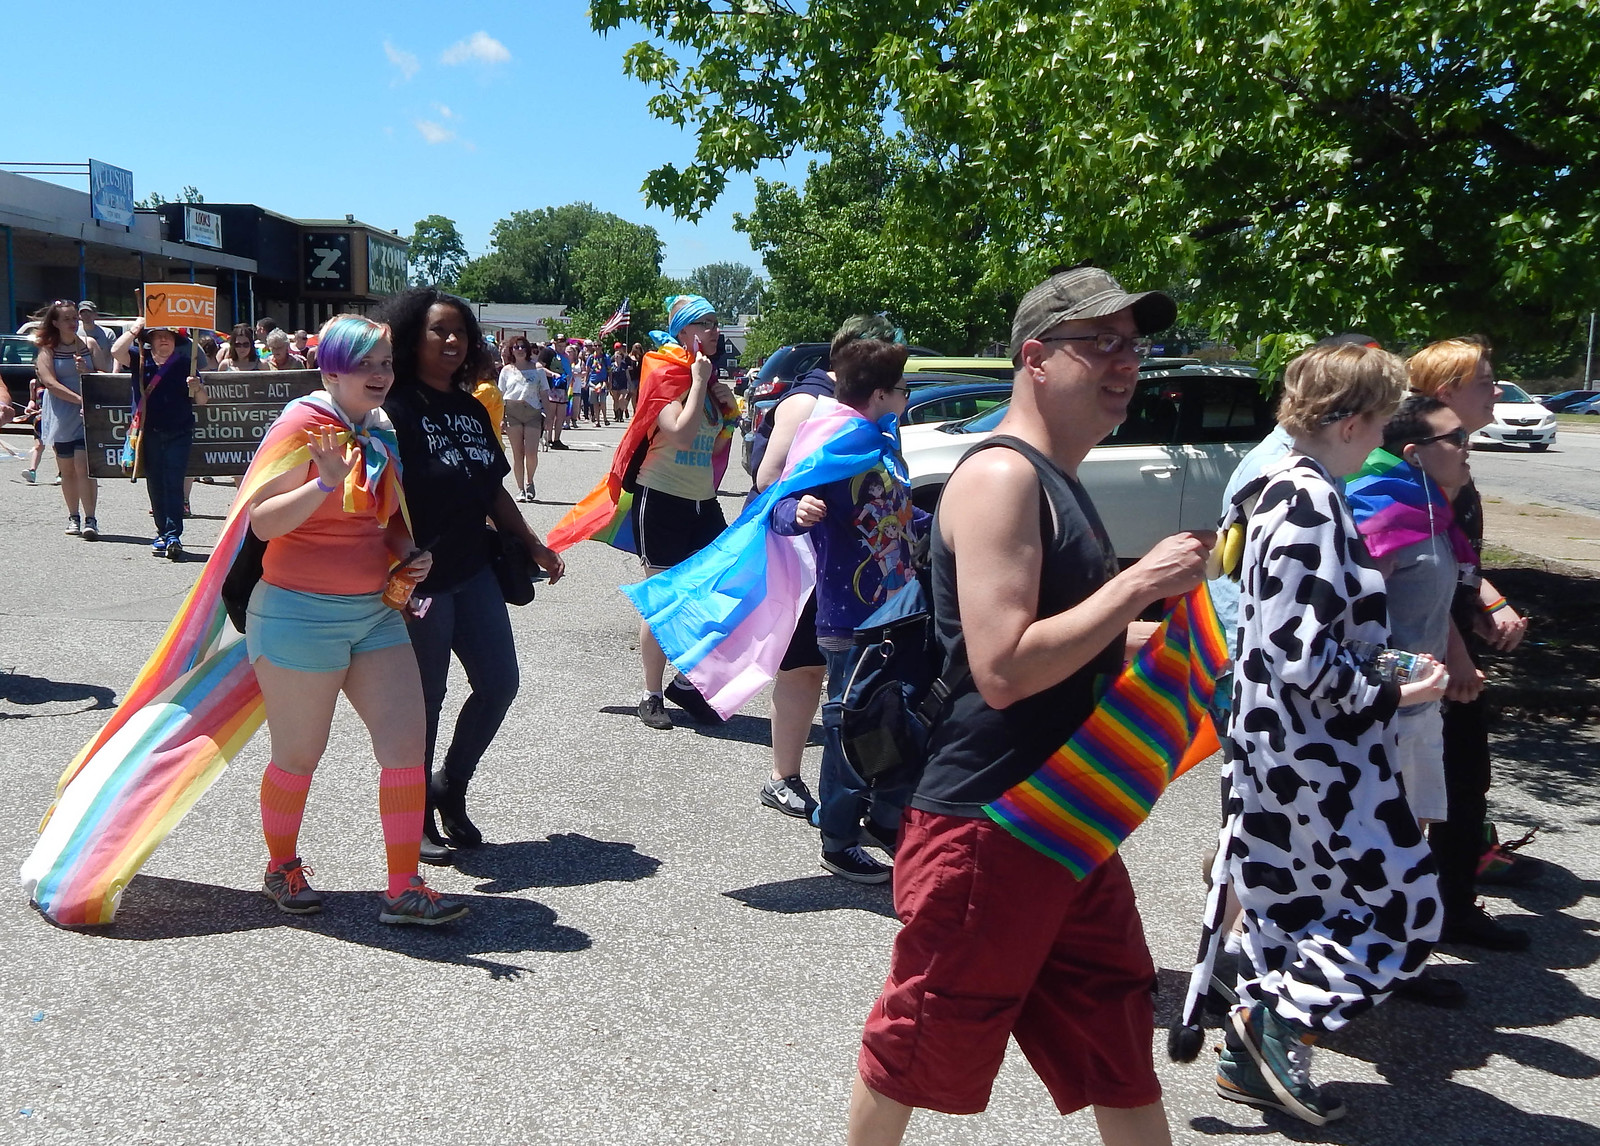 Stepping off in Pride Parade, with Unitarian Universalist Congregation of Erie